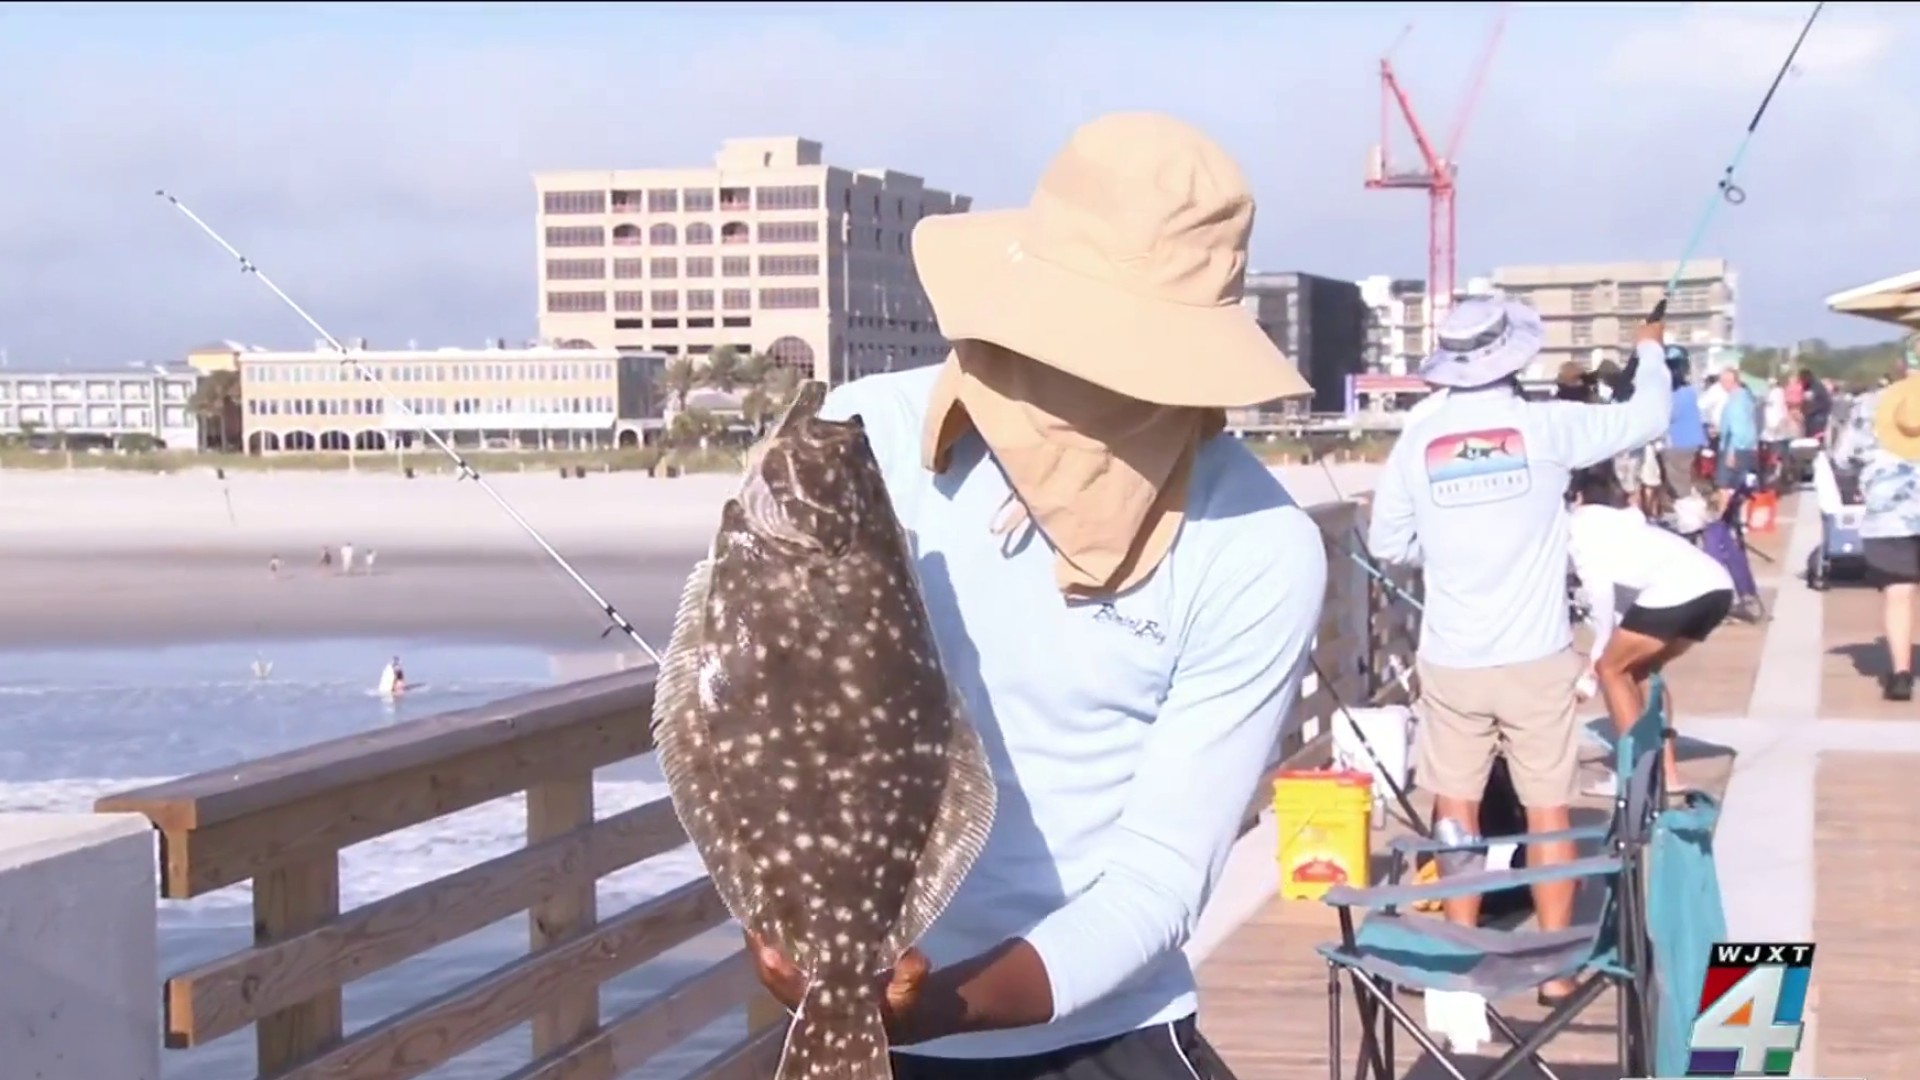 Anglers rejoice! Fishing returns to newly reopened Jacksonville Beach pier